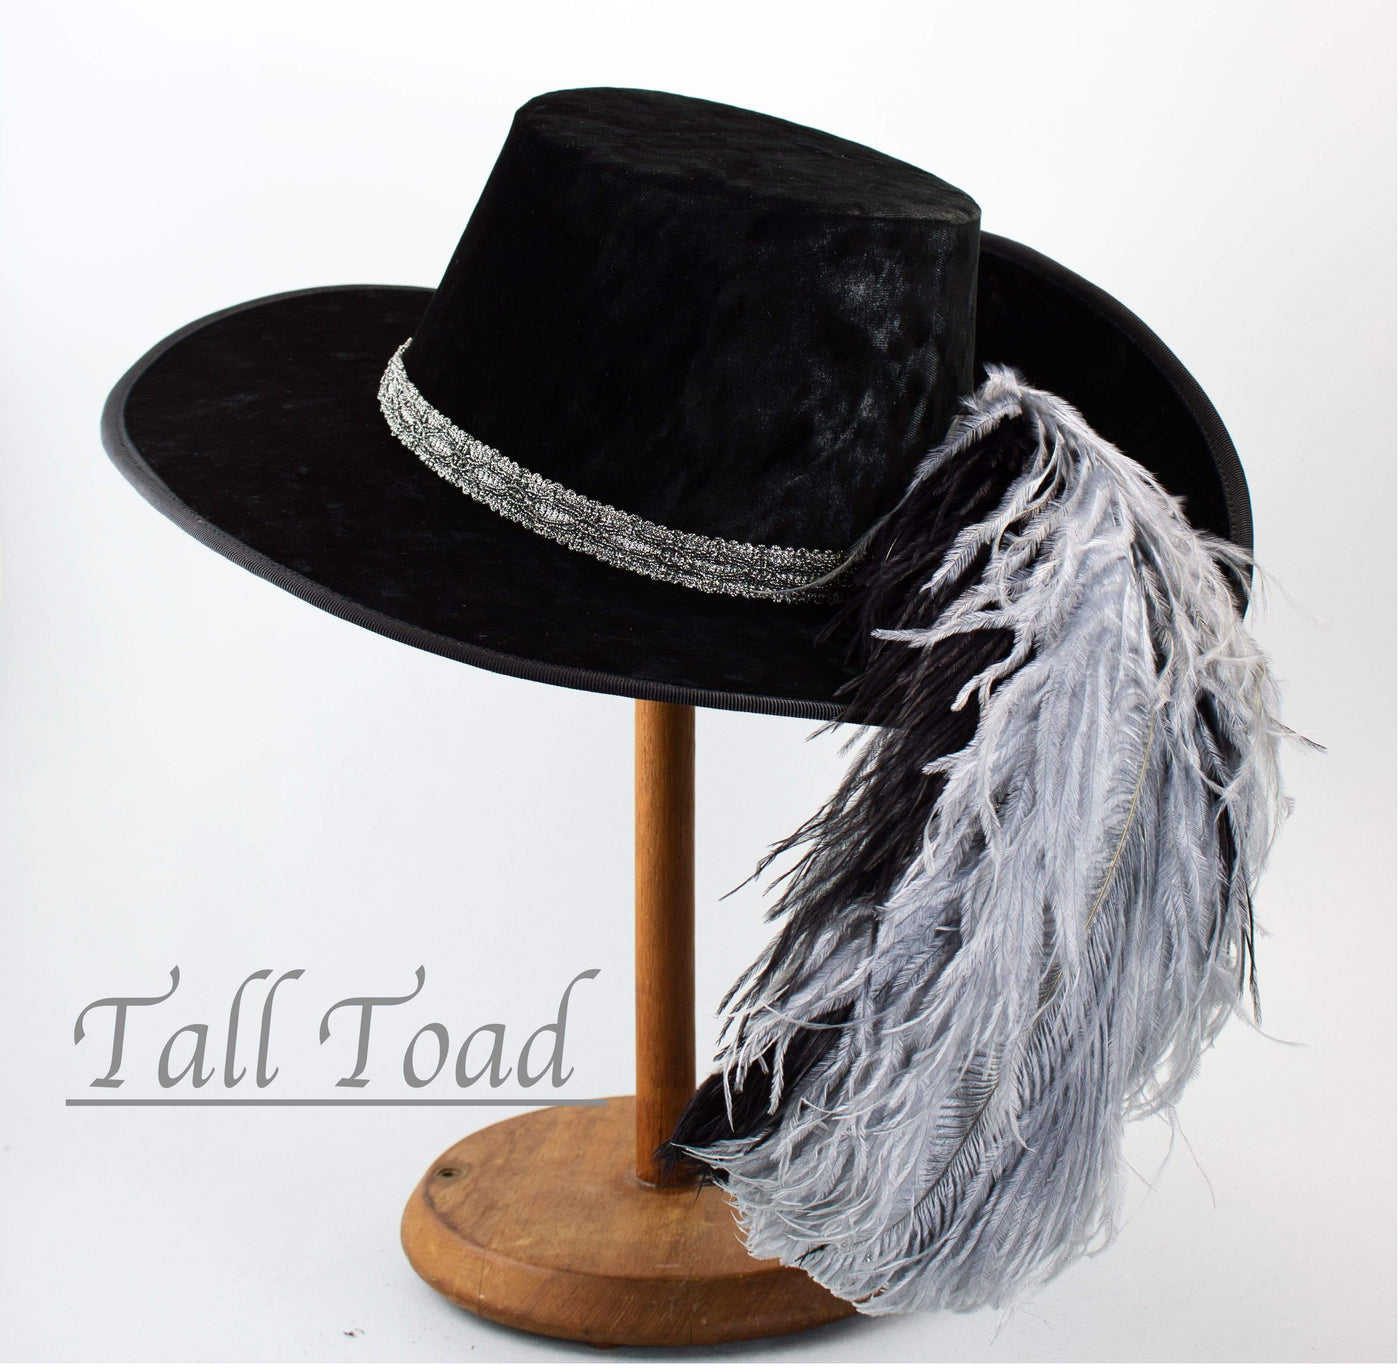 Crushed Velvet Cavalier - Black / Antique Silver / Silver Black Feathers - Tall Toad